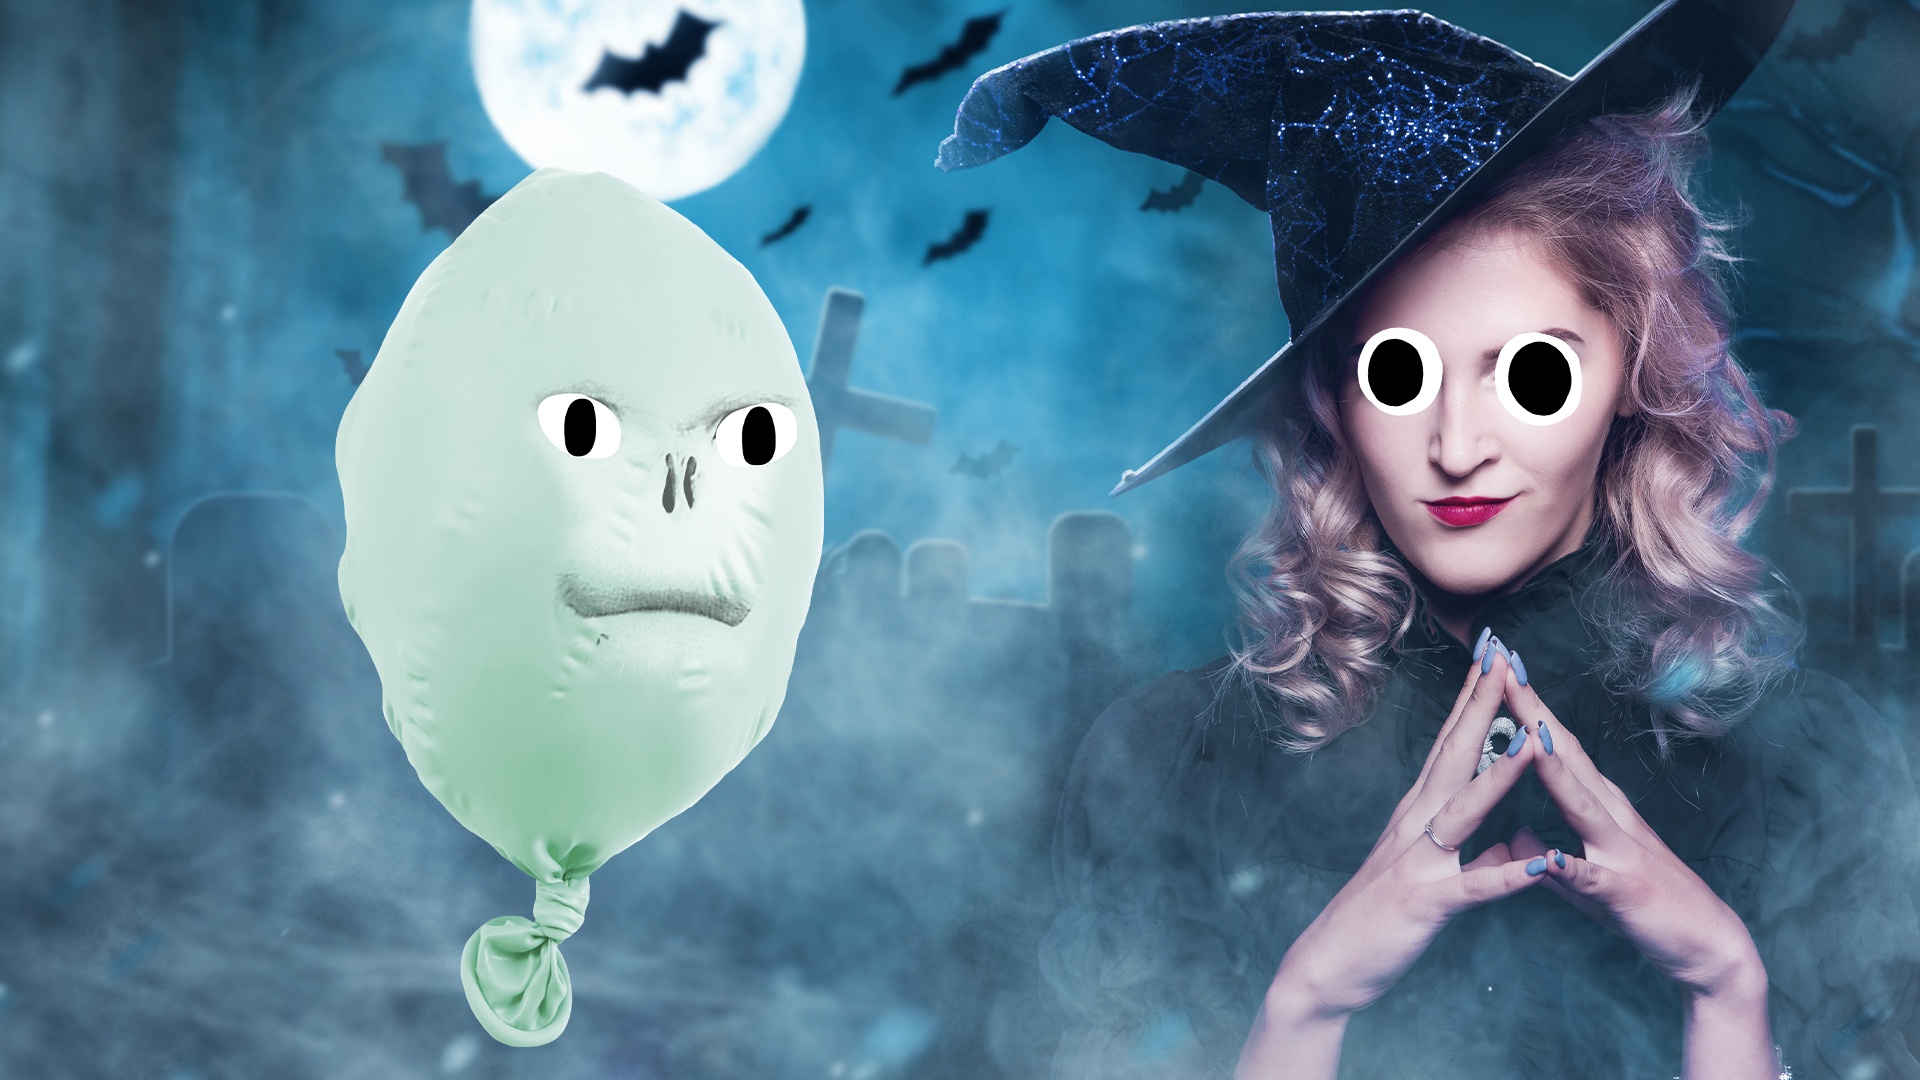 Beano Voldemort balloon and evil looking witch on smoky background